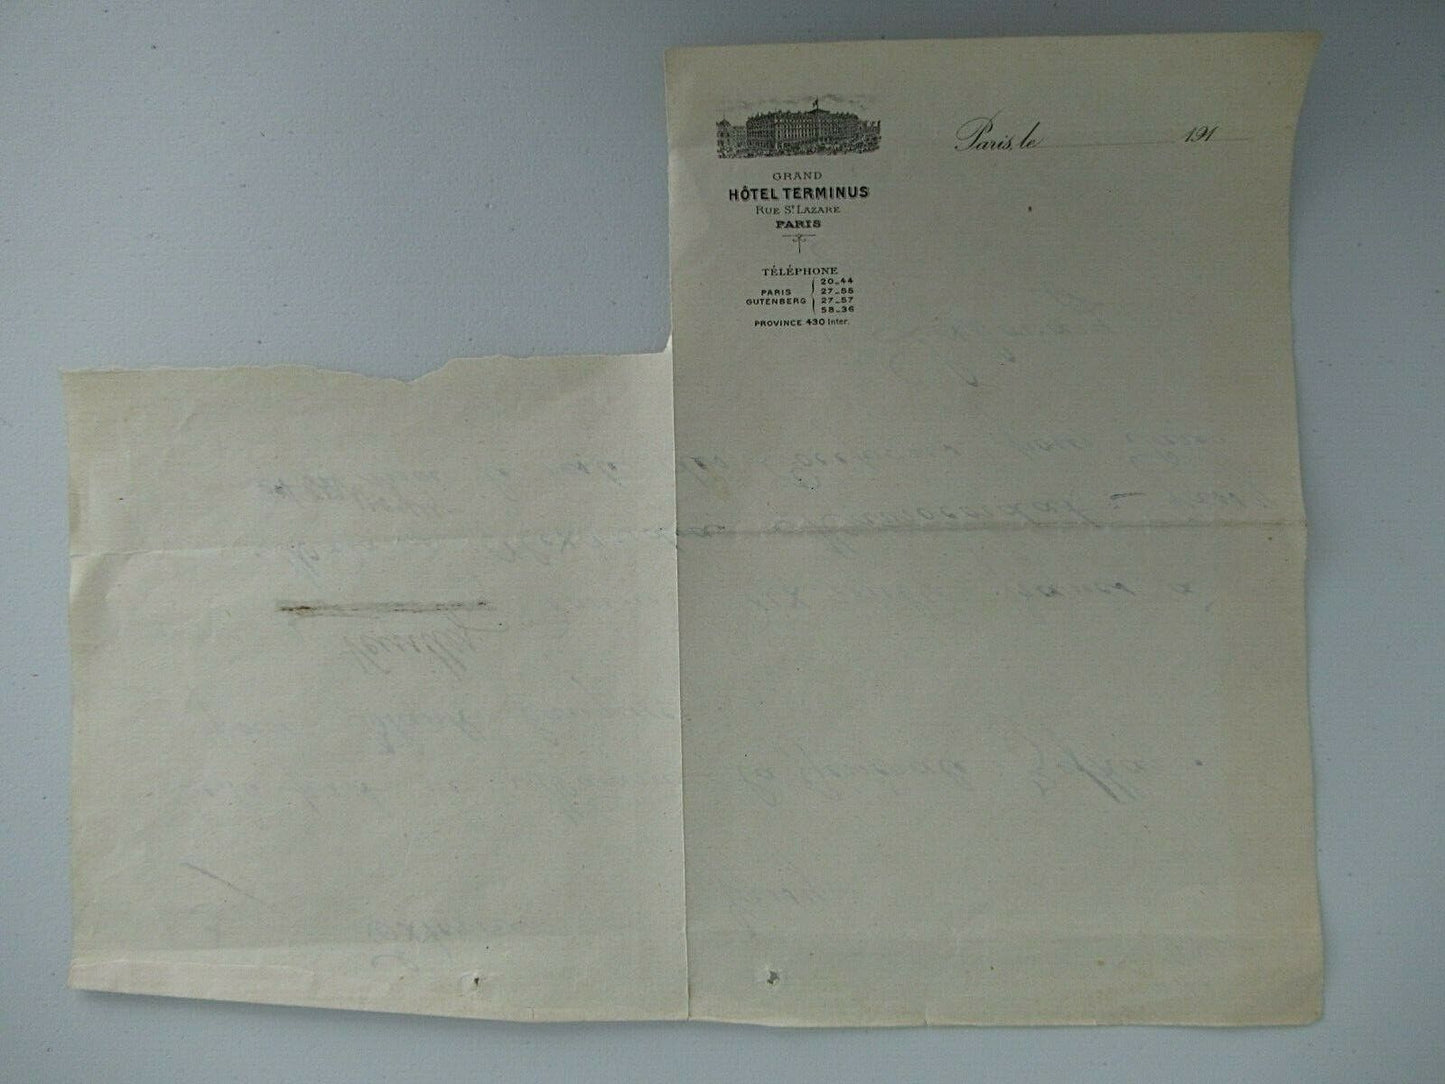 ROMANIA KINGDOM HAND WRITTEN LETTER BY PRIME MINISTER LAHOVARY. RARE!!